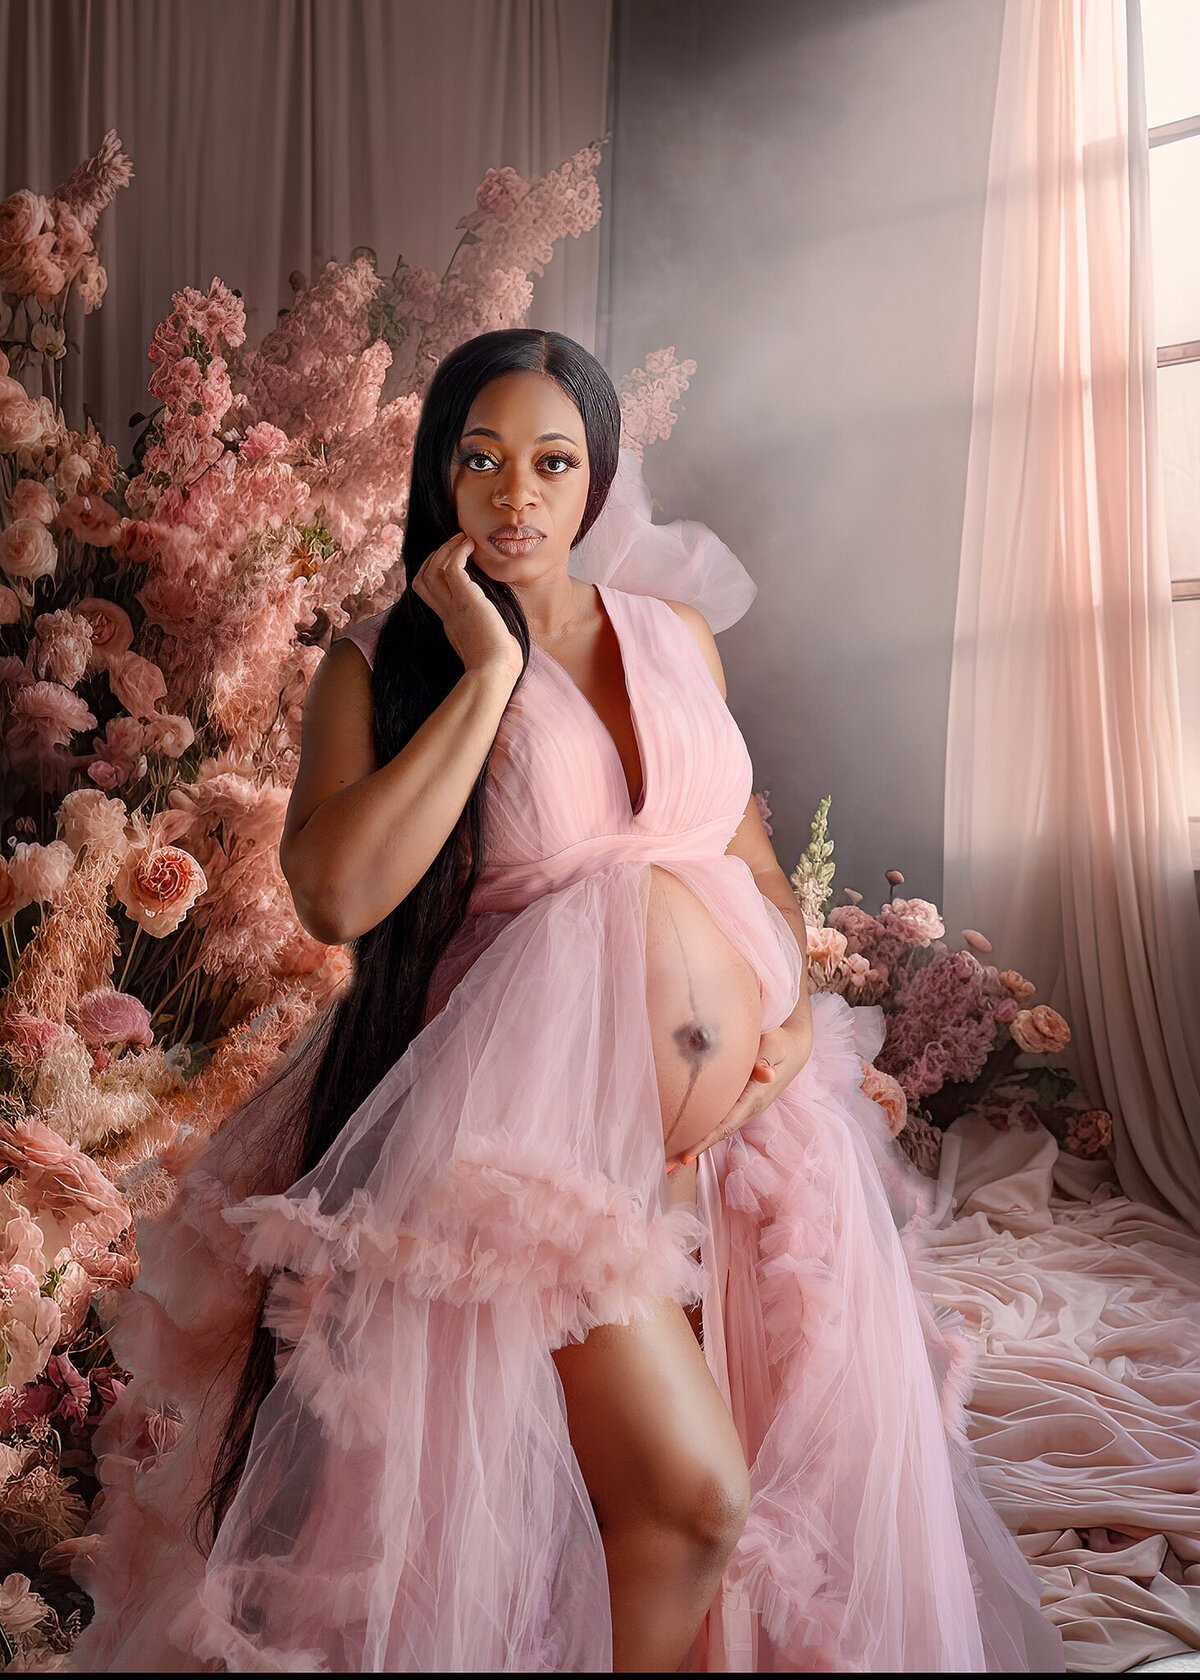 Beautiful Nigerian pregnant woman , wearing a soft pink tulle gown, posing in a room with pink fabrics, flowers and large window letting in lots of beautiful light